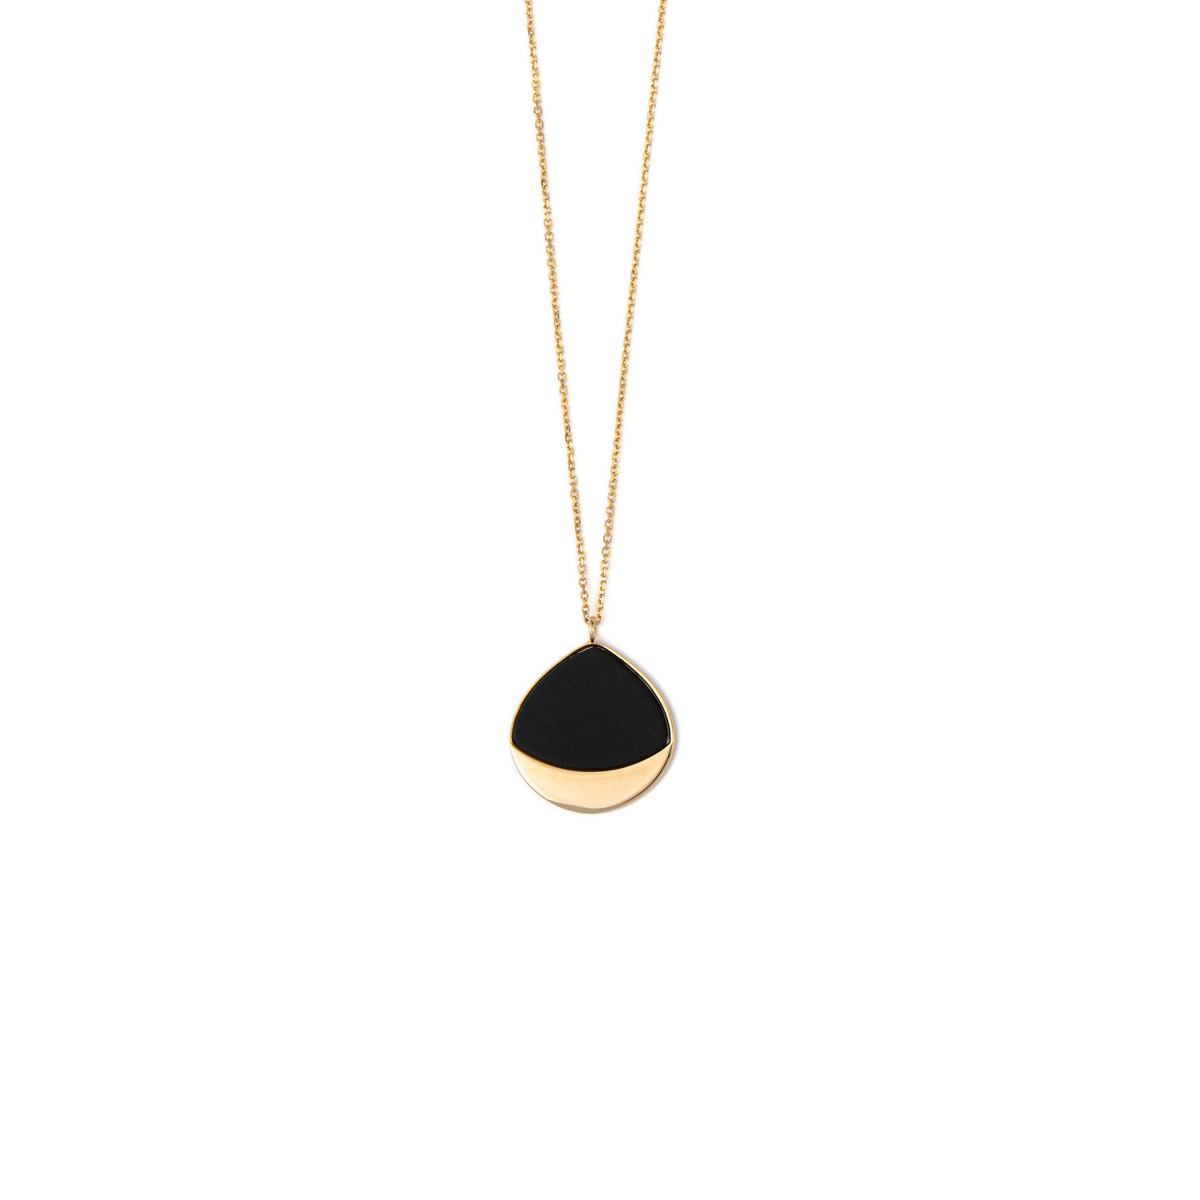 Tear Drop Black and Gold Necklace - 14K Gold